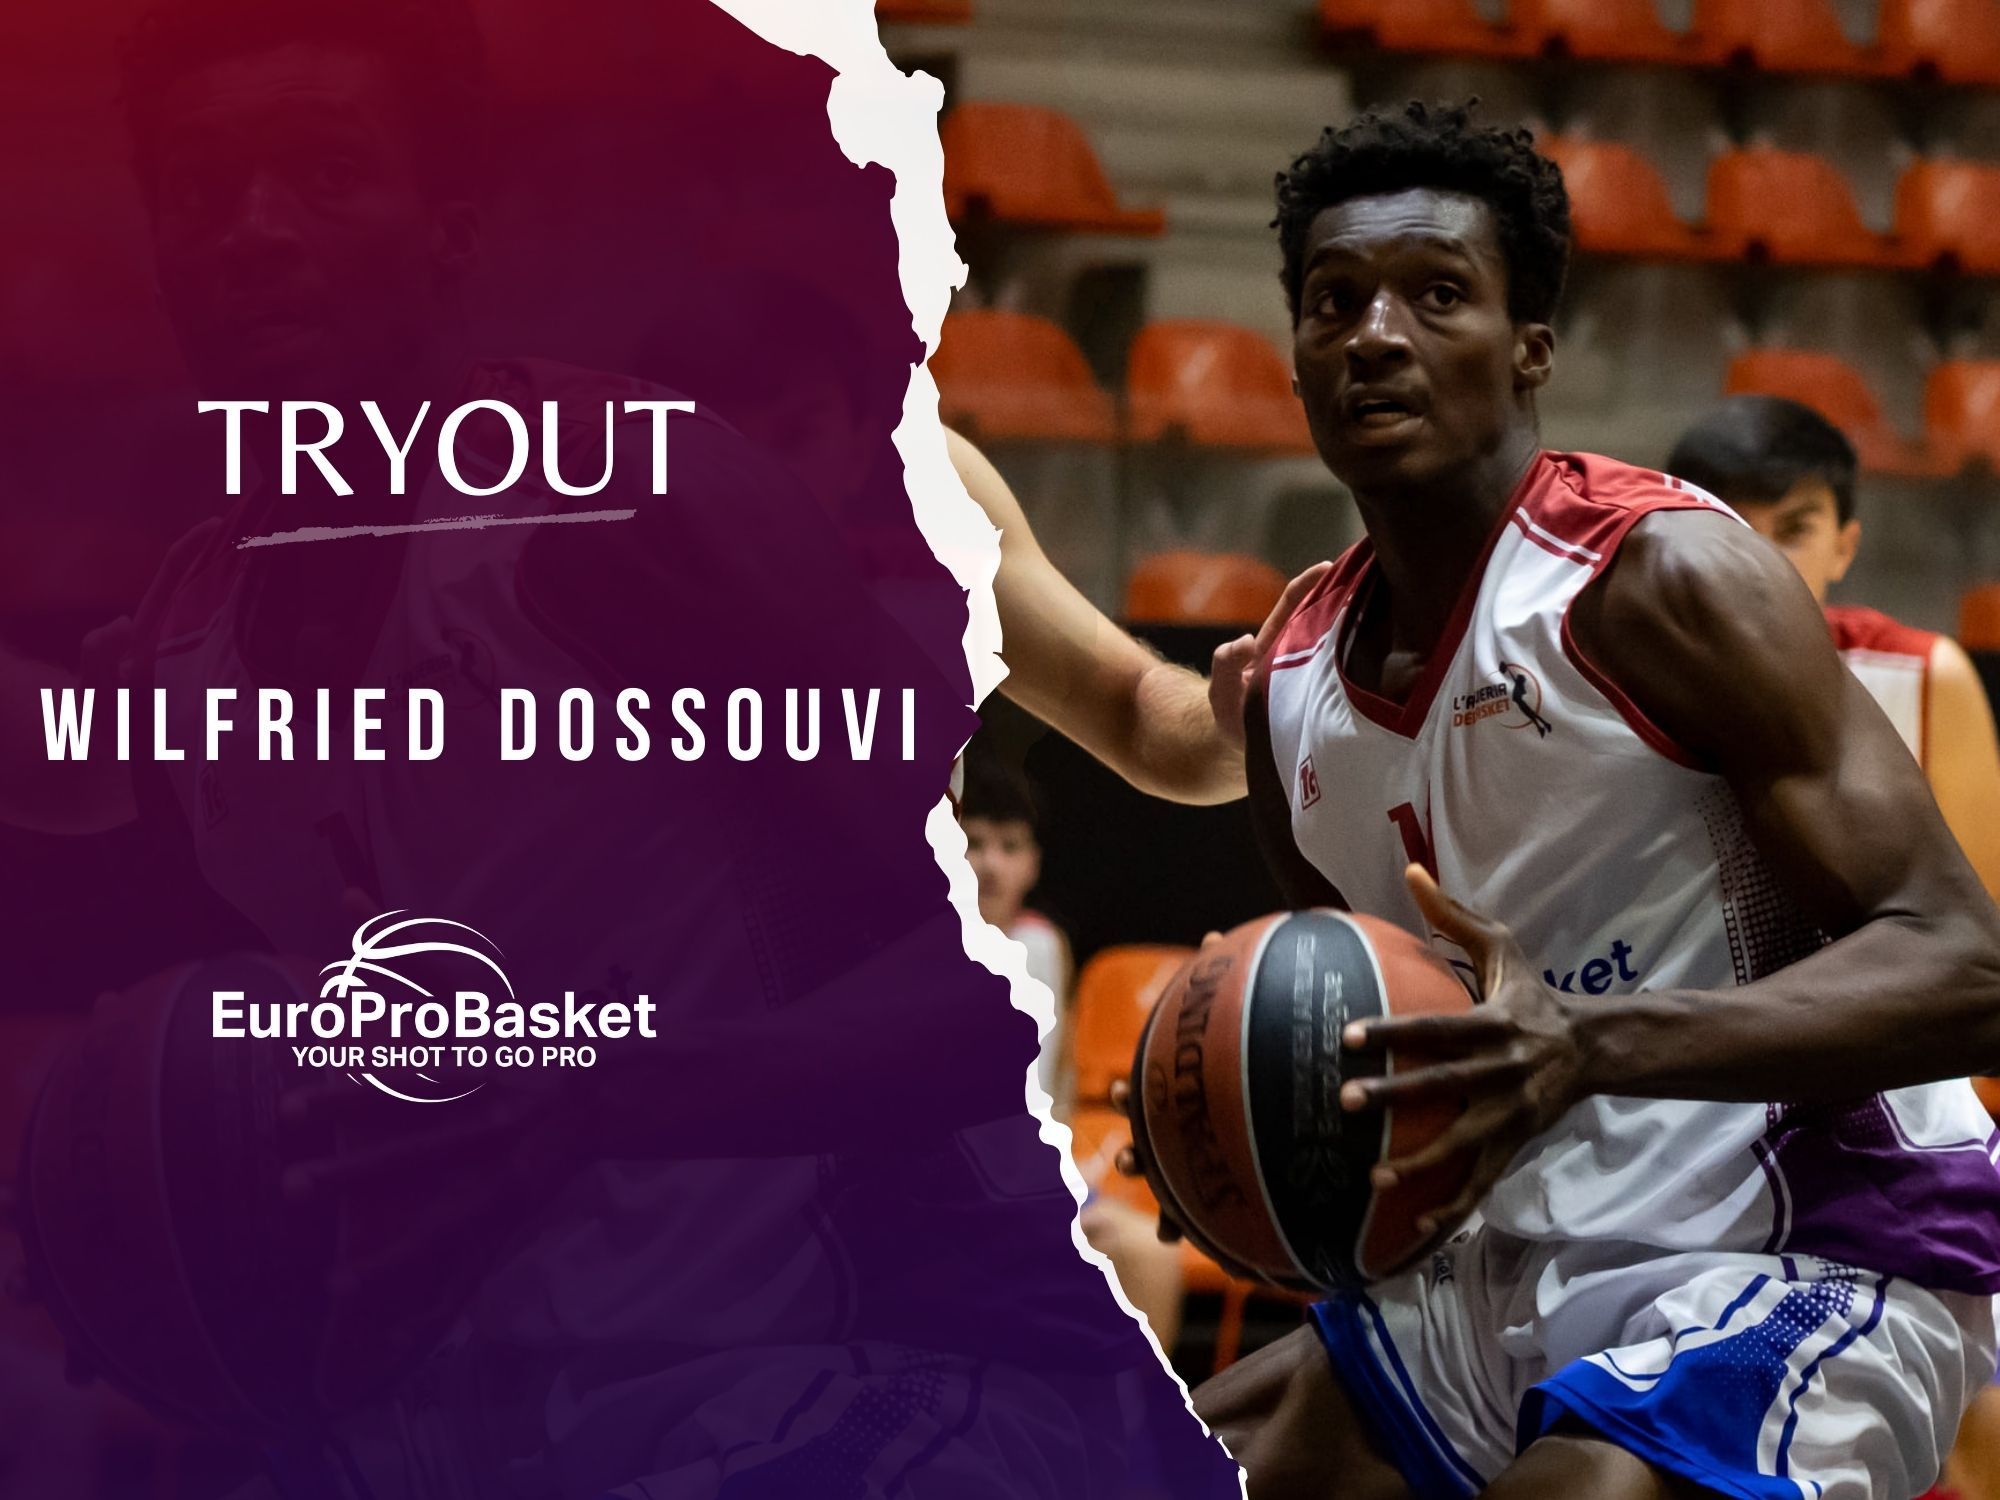 EuroProBasket Player On Tryout in Valencia, Spain